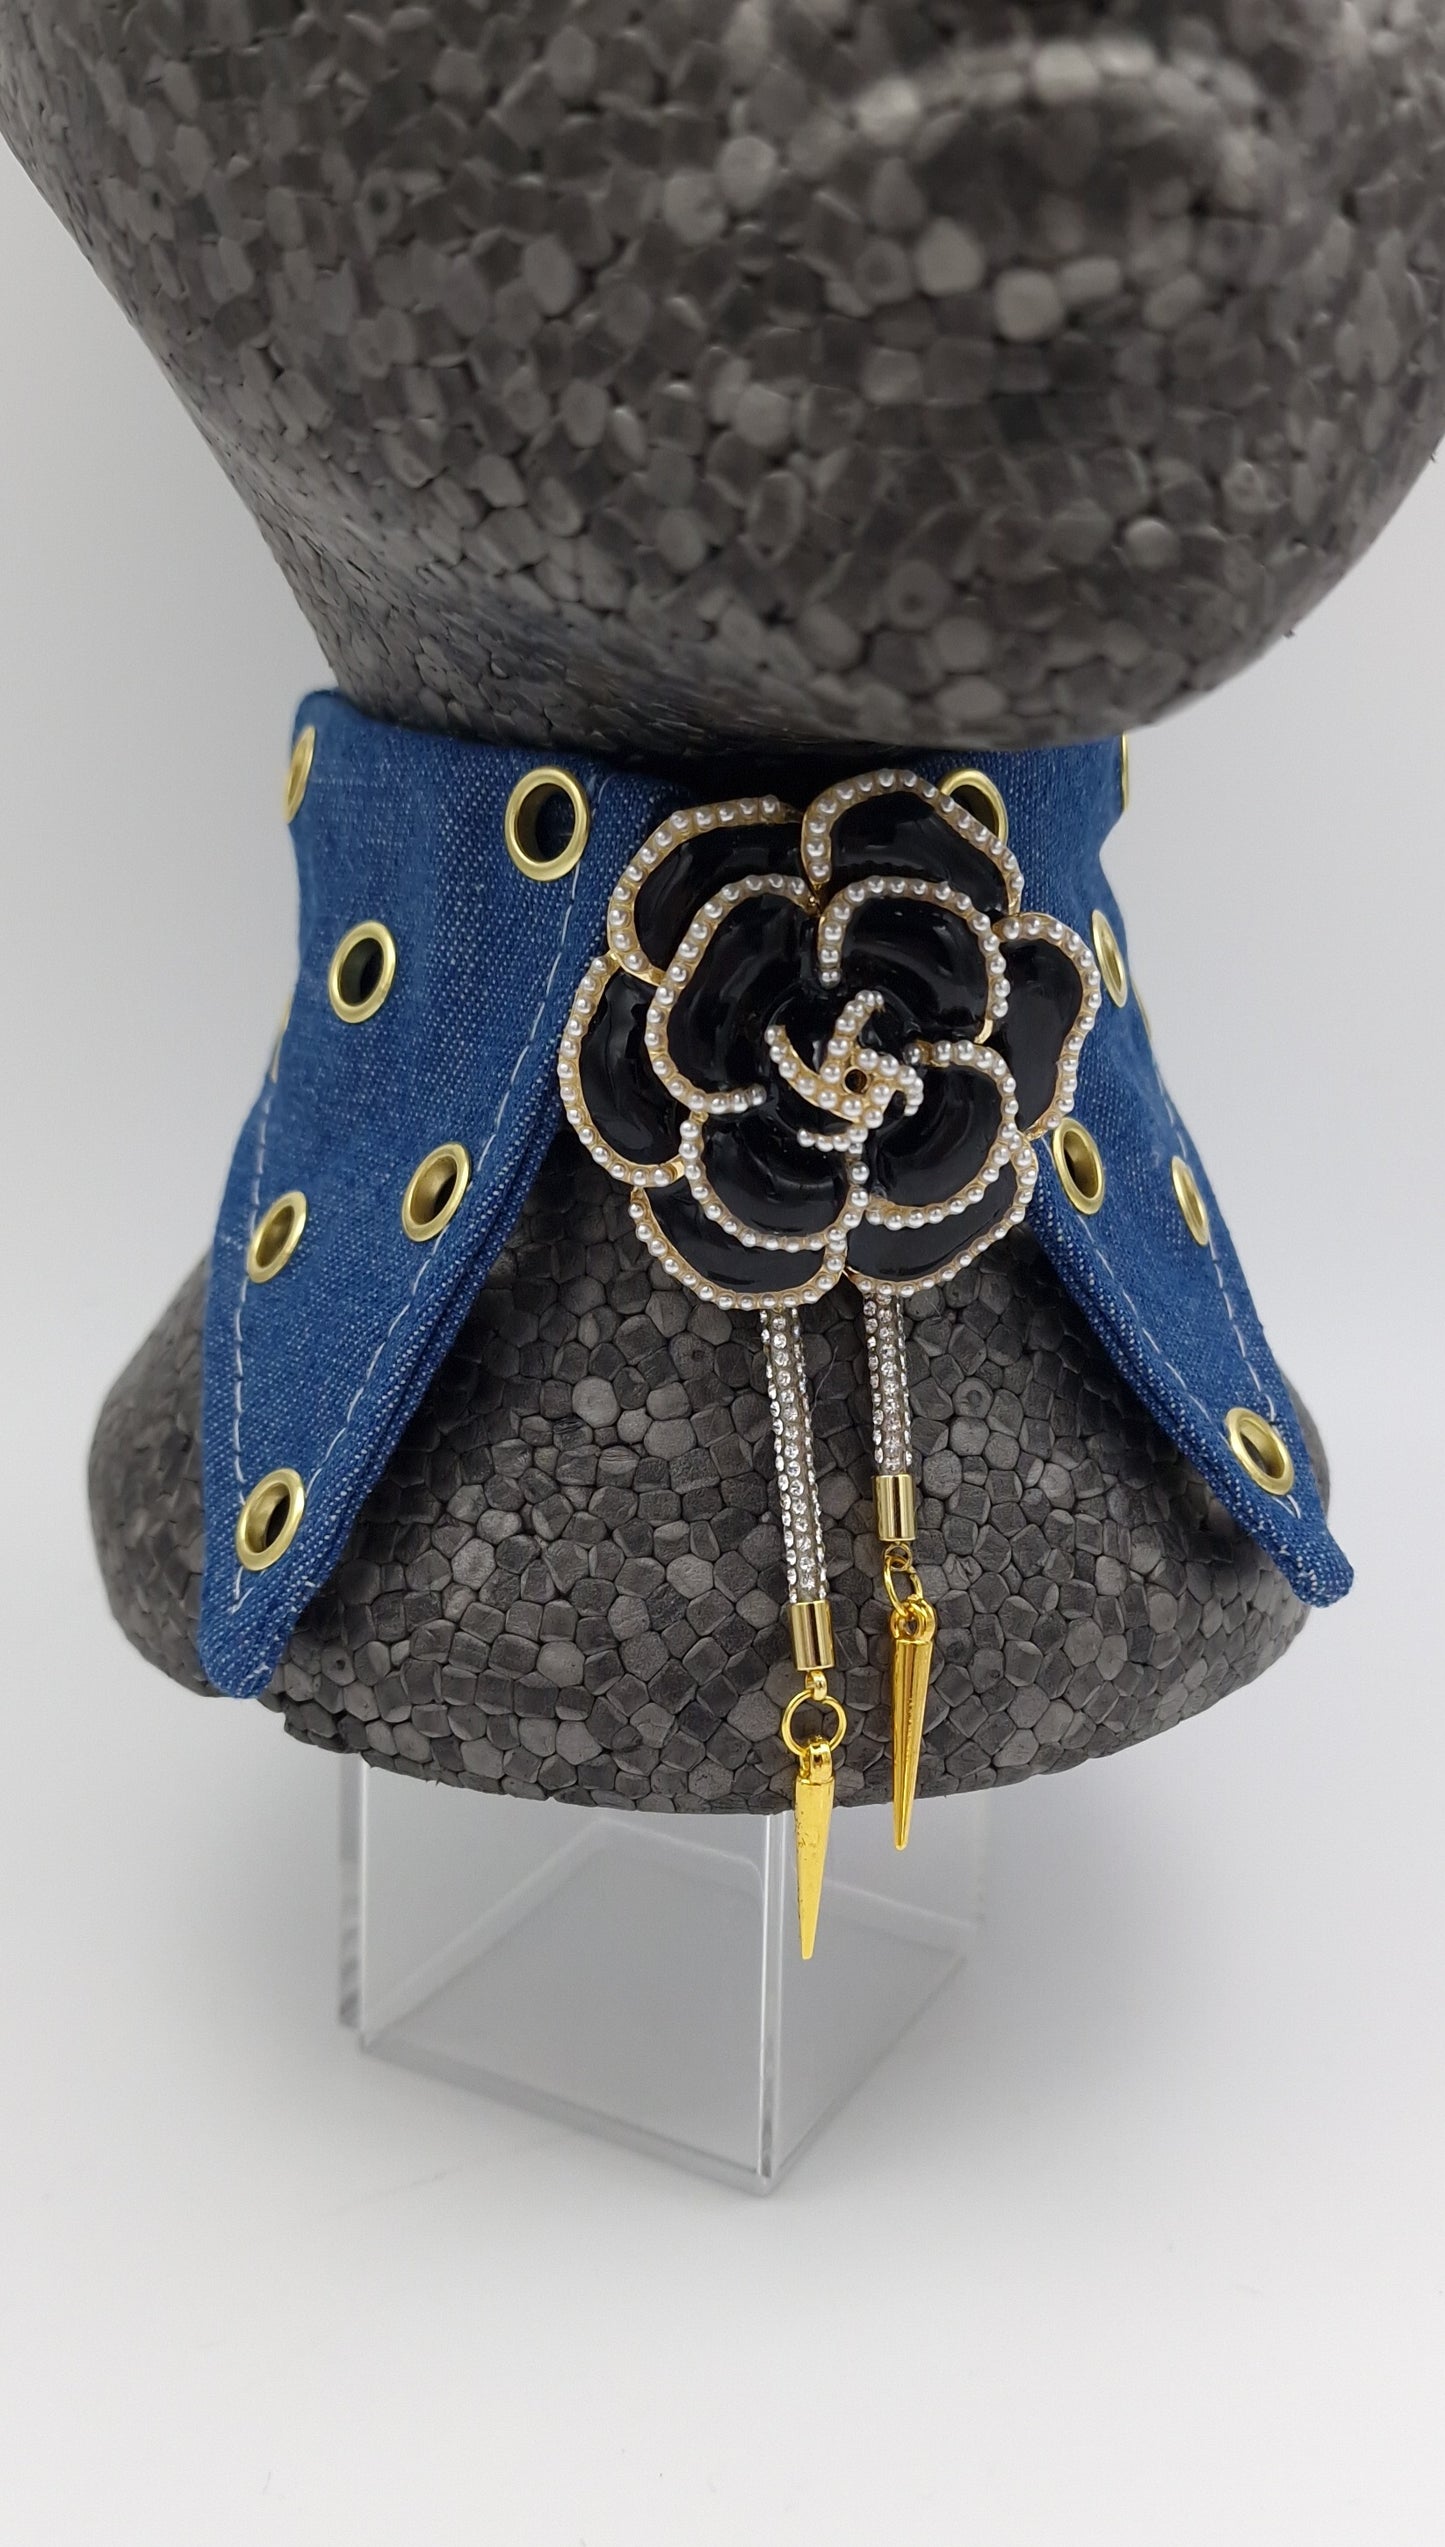 The eyelet denim collar and bolo tie